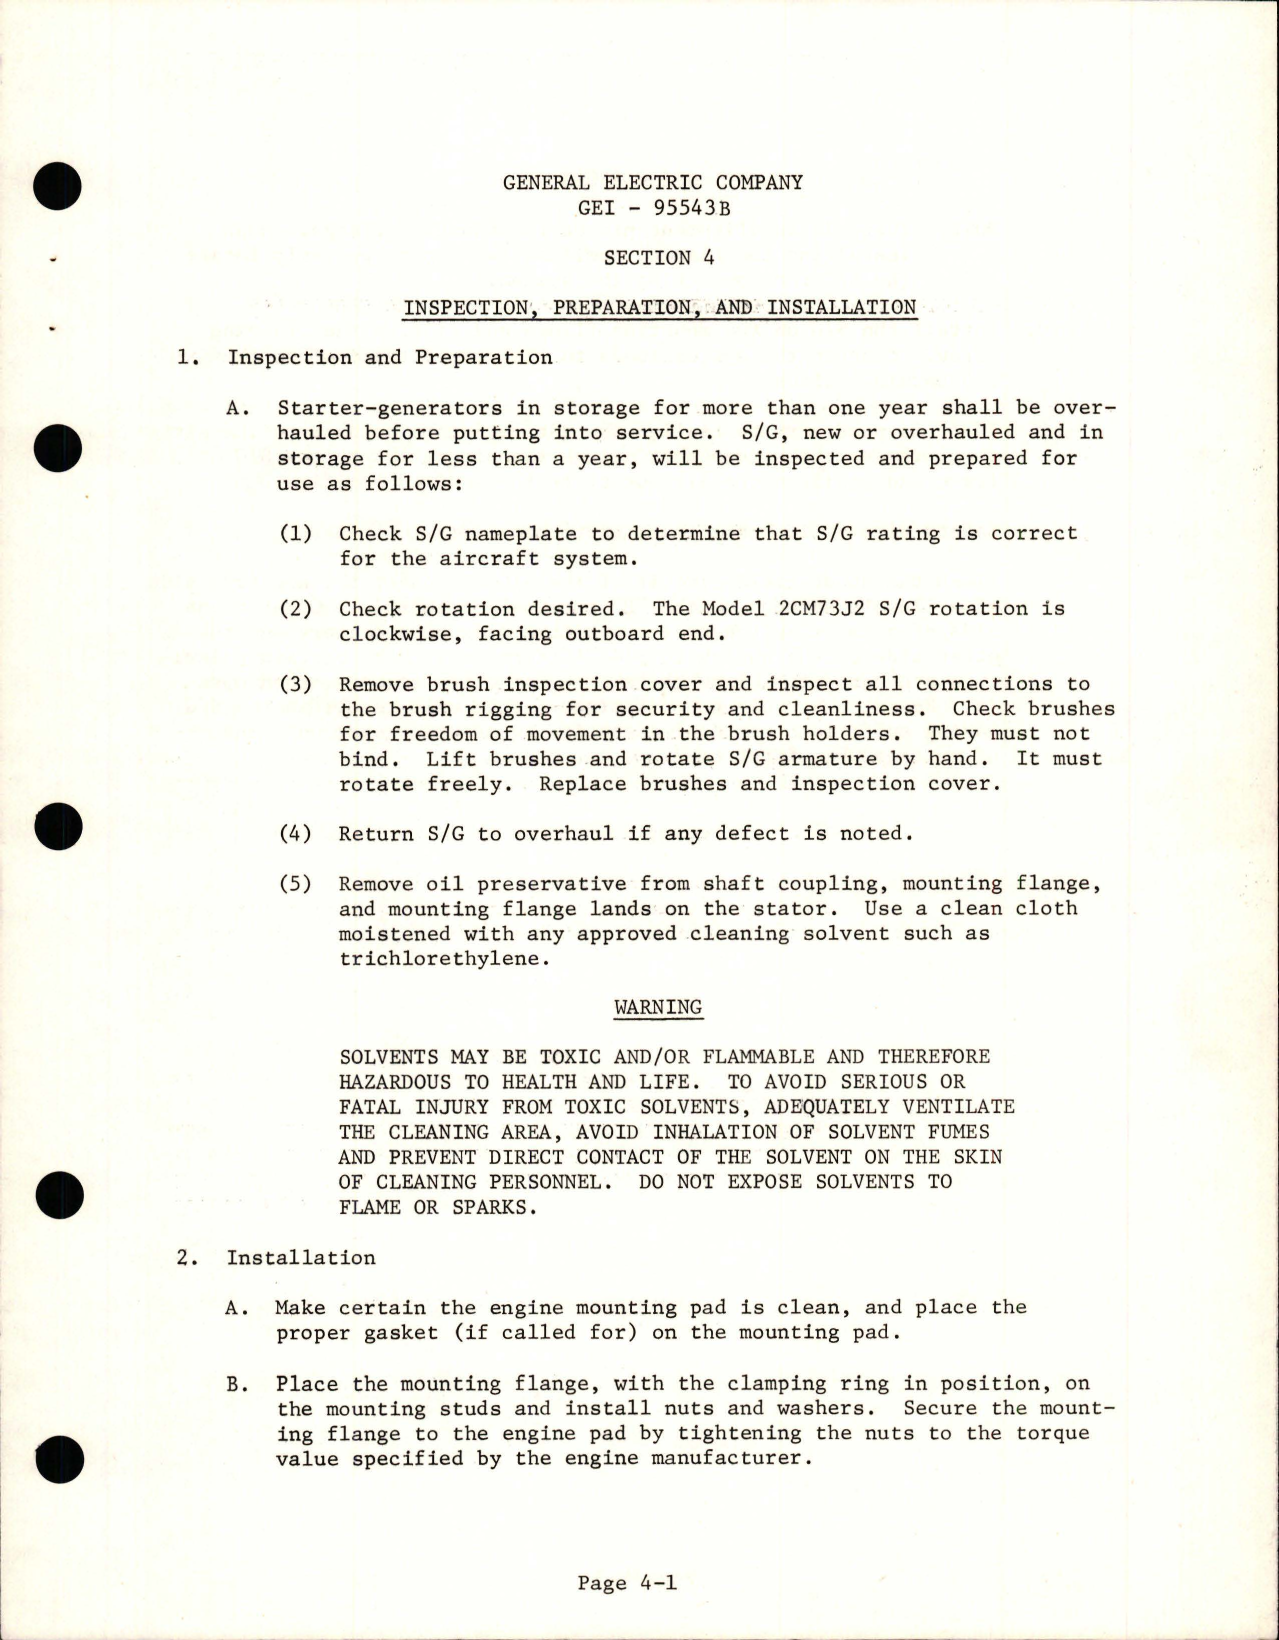 Sample page 7 from AirCorps Library document: Instructions for DC Starter Generator - Models 2CM73J1A, 2CM73J2, and 2CM73J2A 